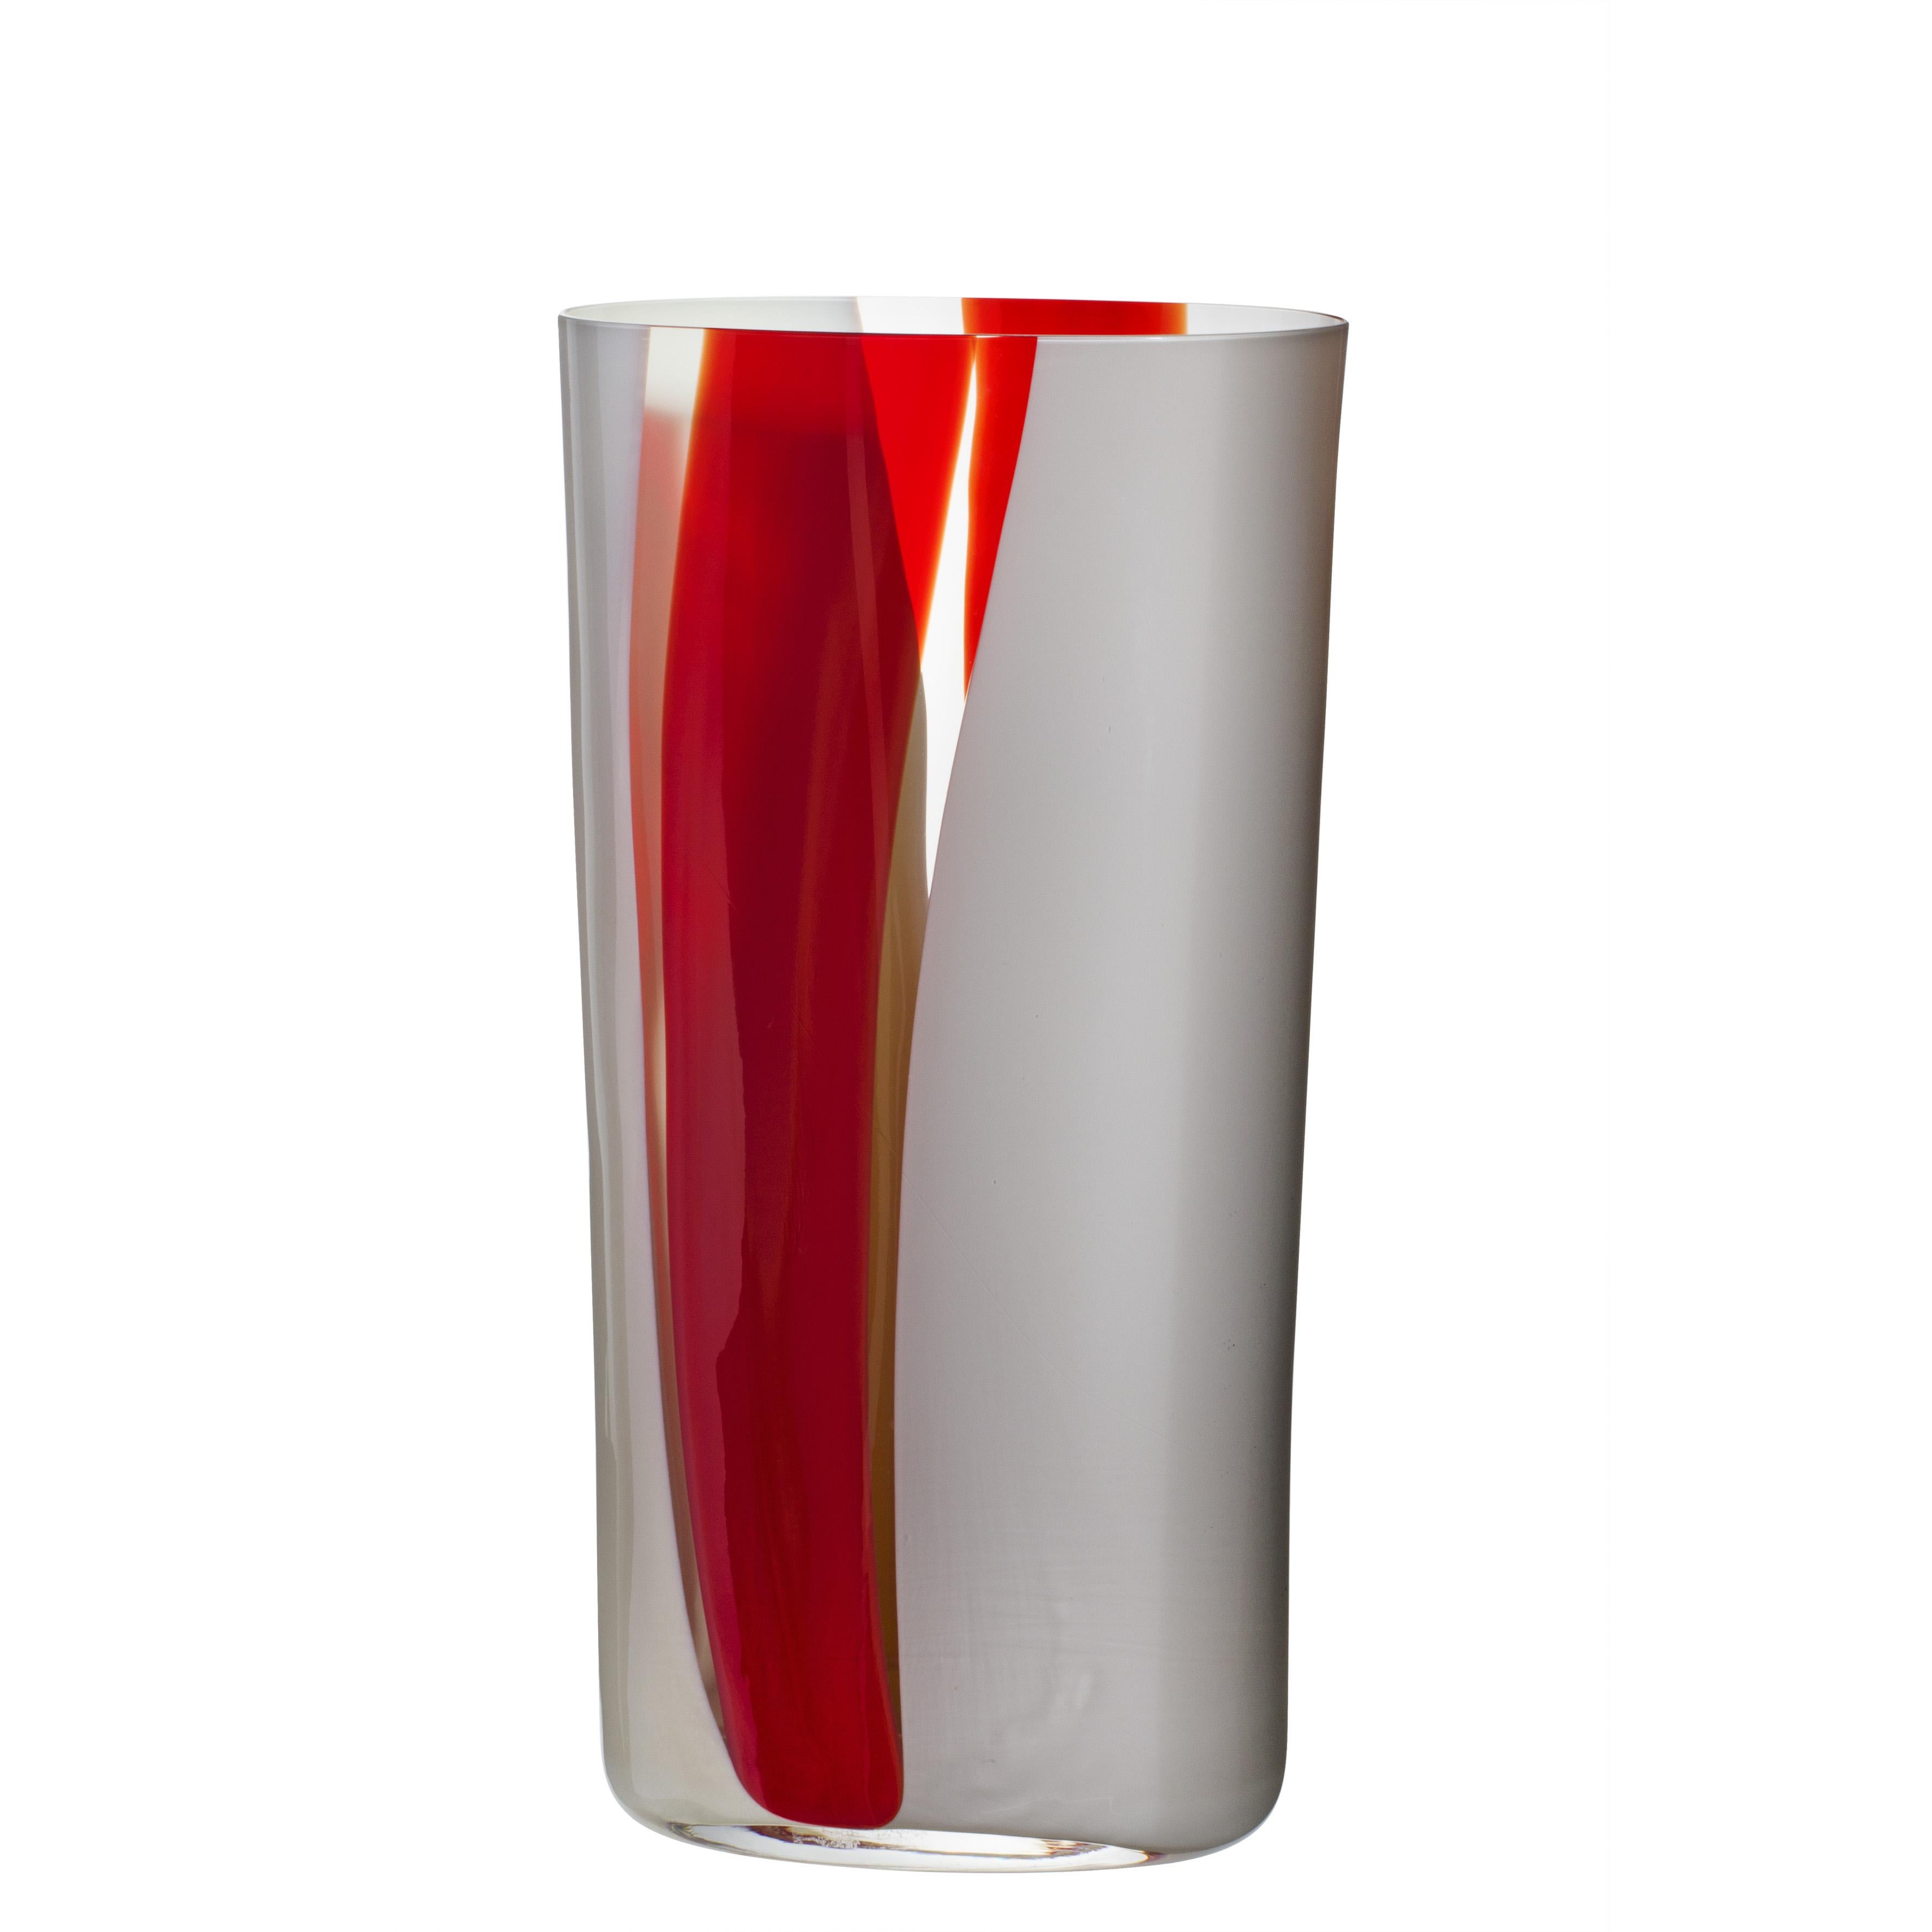 Large Ovale Vase in Red, White, and Grey by Carlo Moretti